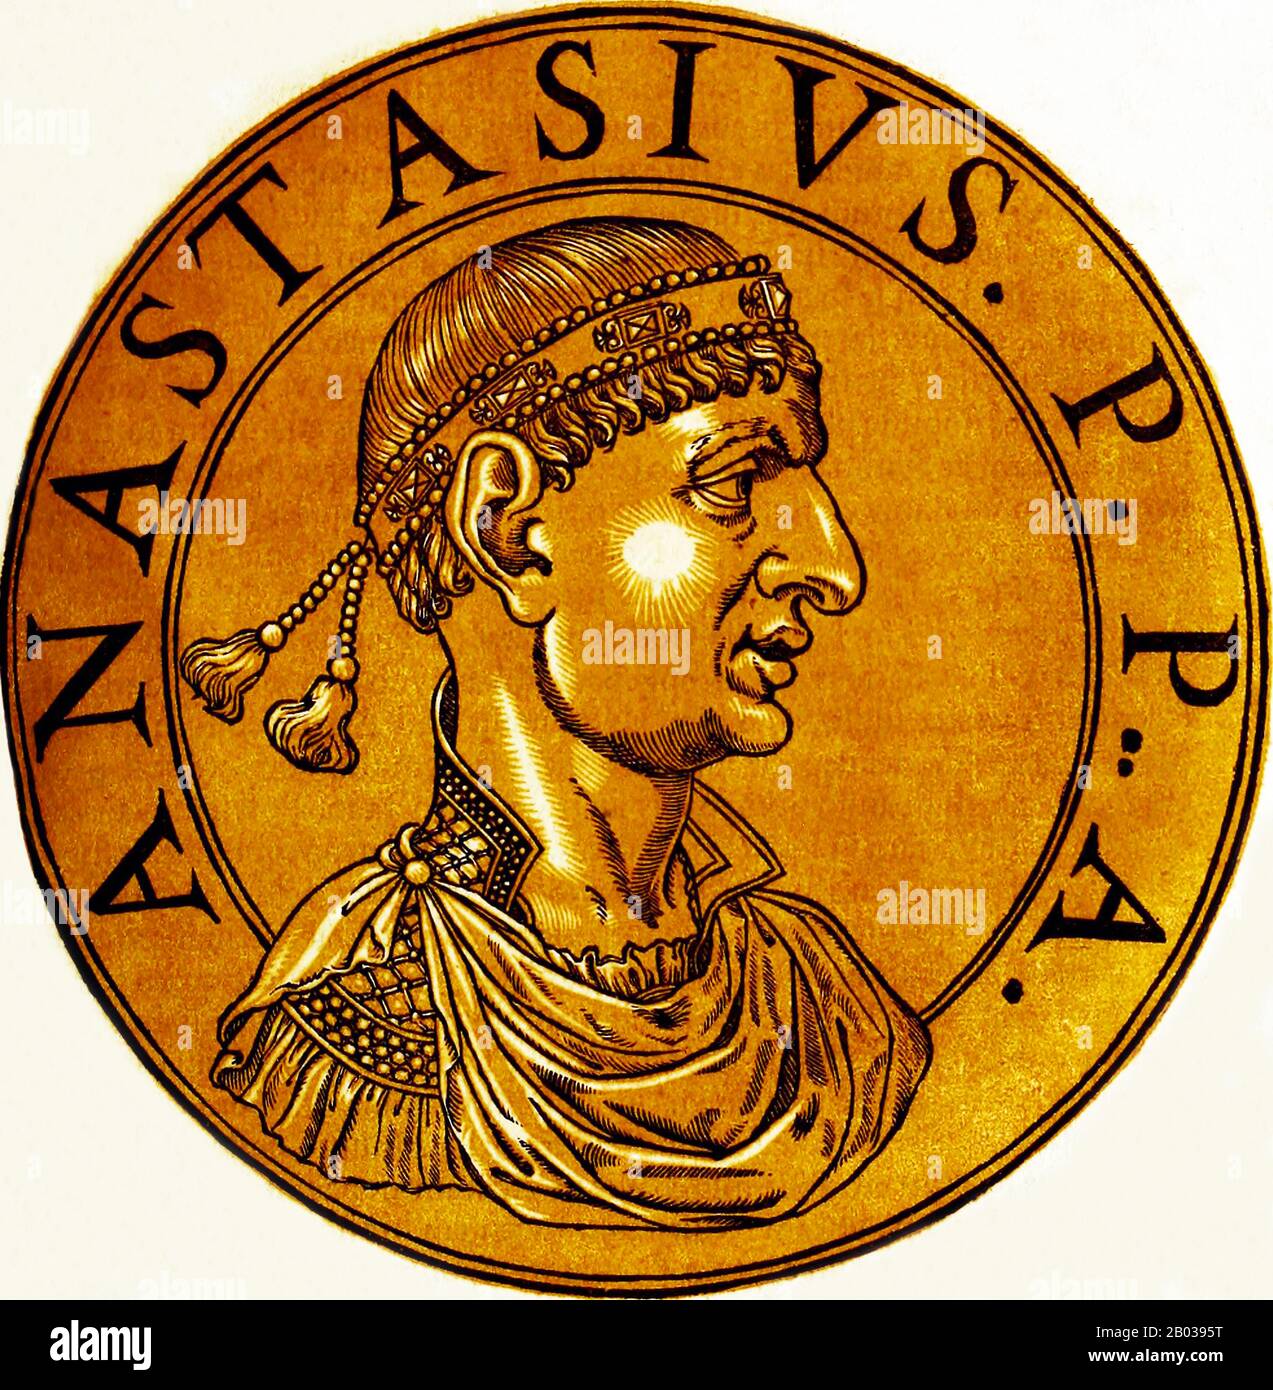 Anastasius I (431-518), also known as Anastasius Dicorus, was born into an Illyrian family. After Emperor Zeno's death in 491 CE, many citizens of the empire wanted both a Roman and an Orthodox Christian emperor. In response, Zeno's widow and Emperor Leo I's daughter Ariadne turned to Anastasius, who was in his sixties when he married Ariadne and ascended to the throne.  Anastasius soon had to deal with the usurper Longinus, brother of the late Zeno, engaging in the Isaurian War and defeating Longinus in 497. He later fought against the Sassanid Empire in the Anastasian War, the war raging fro Stock Photo